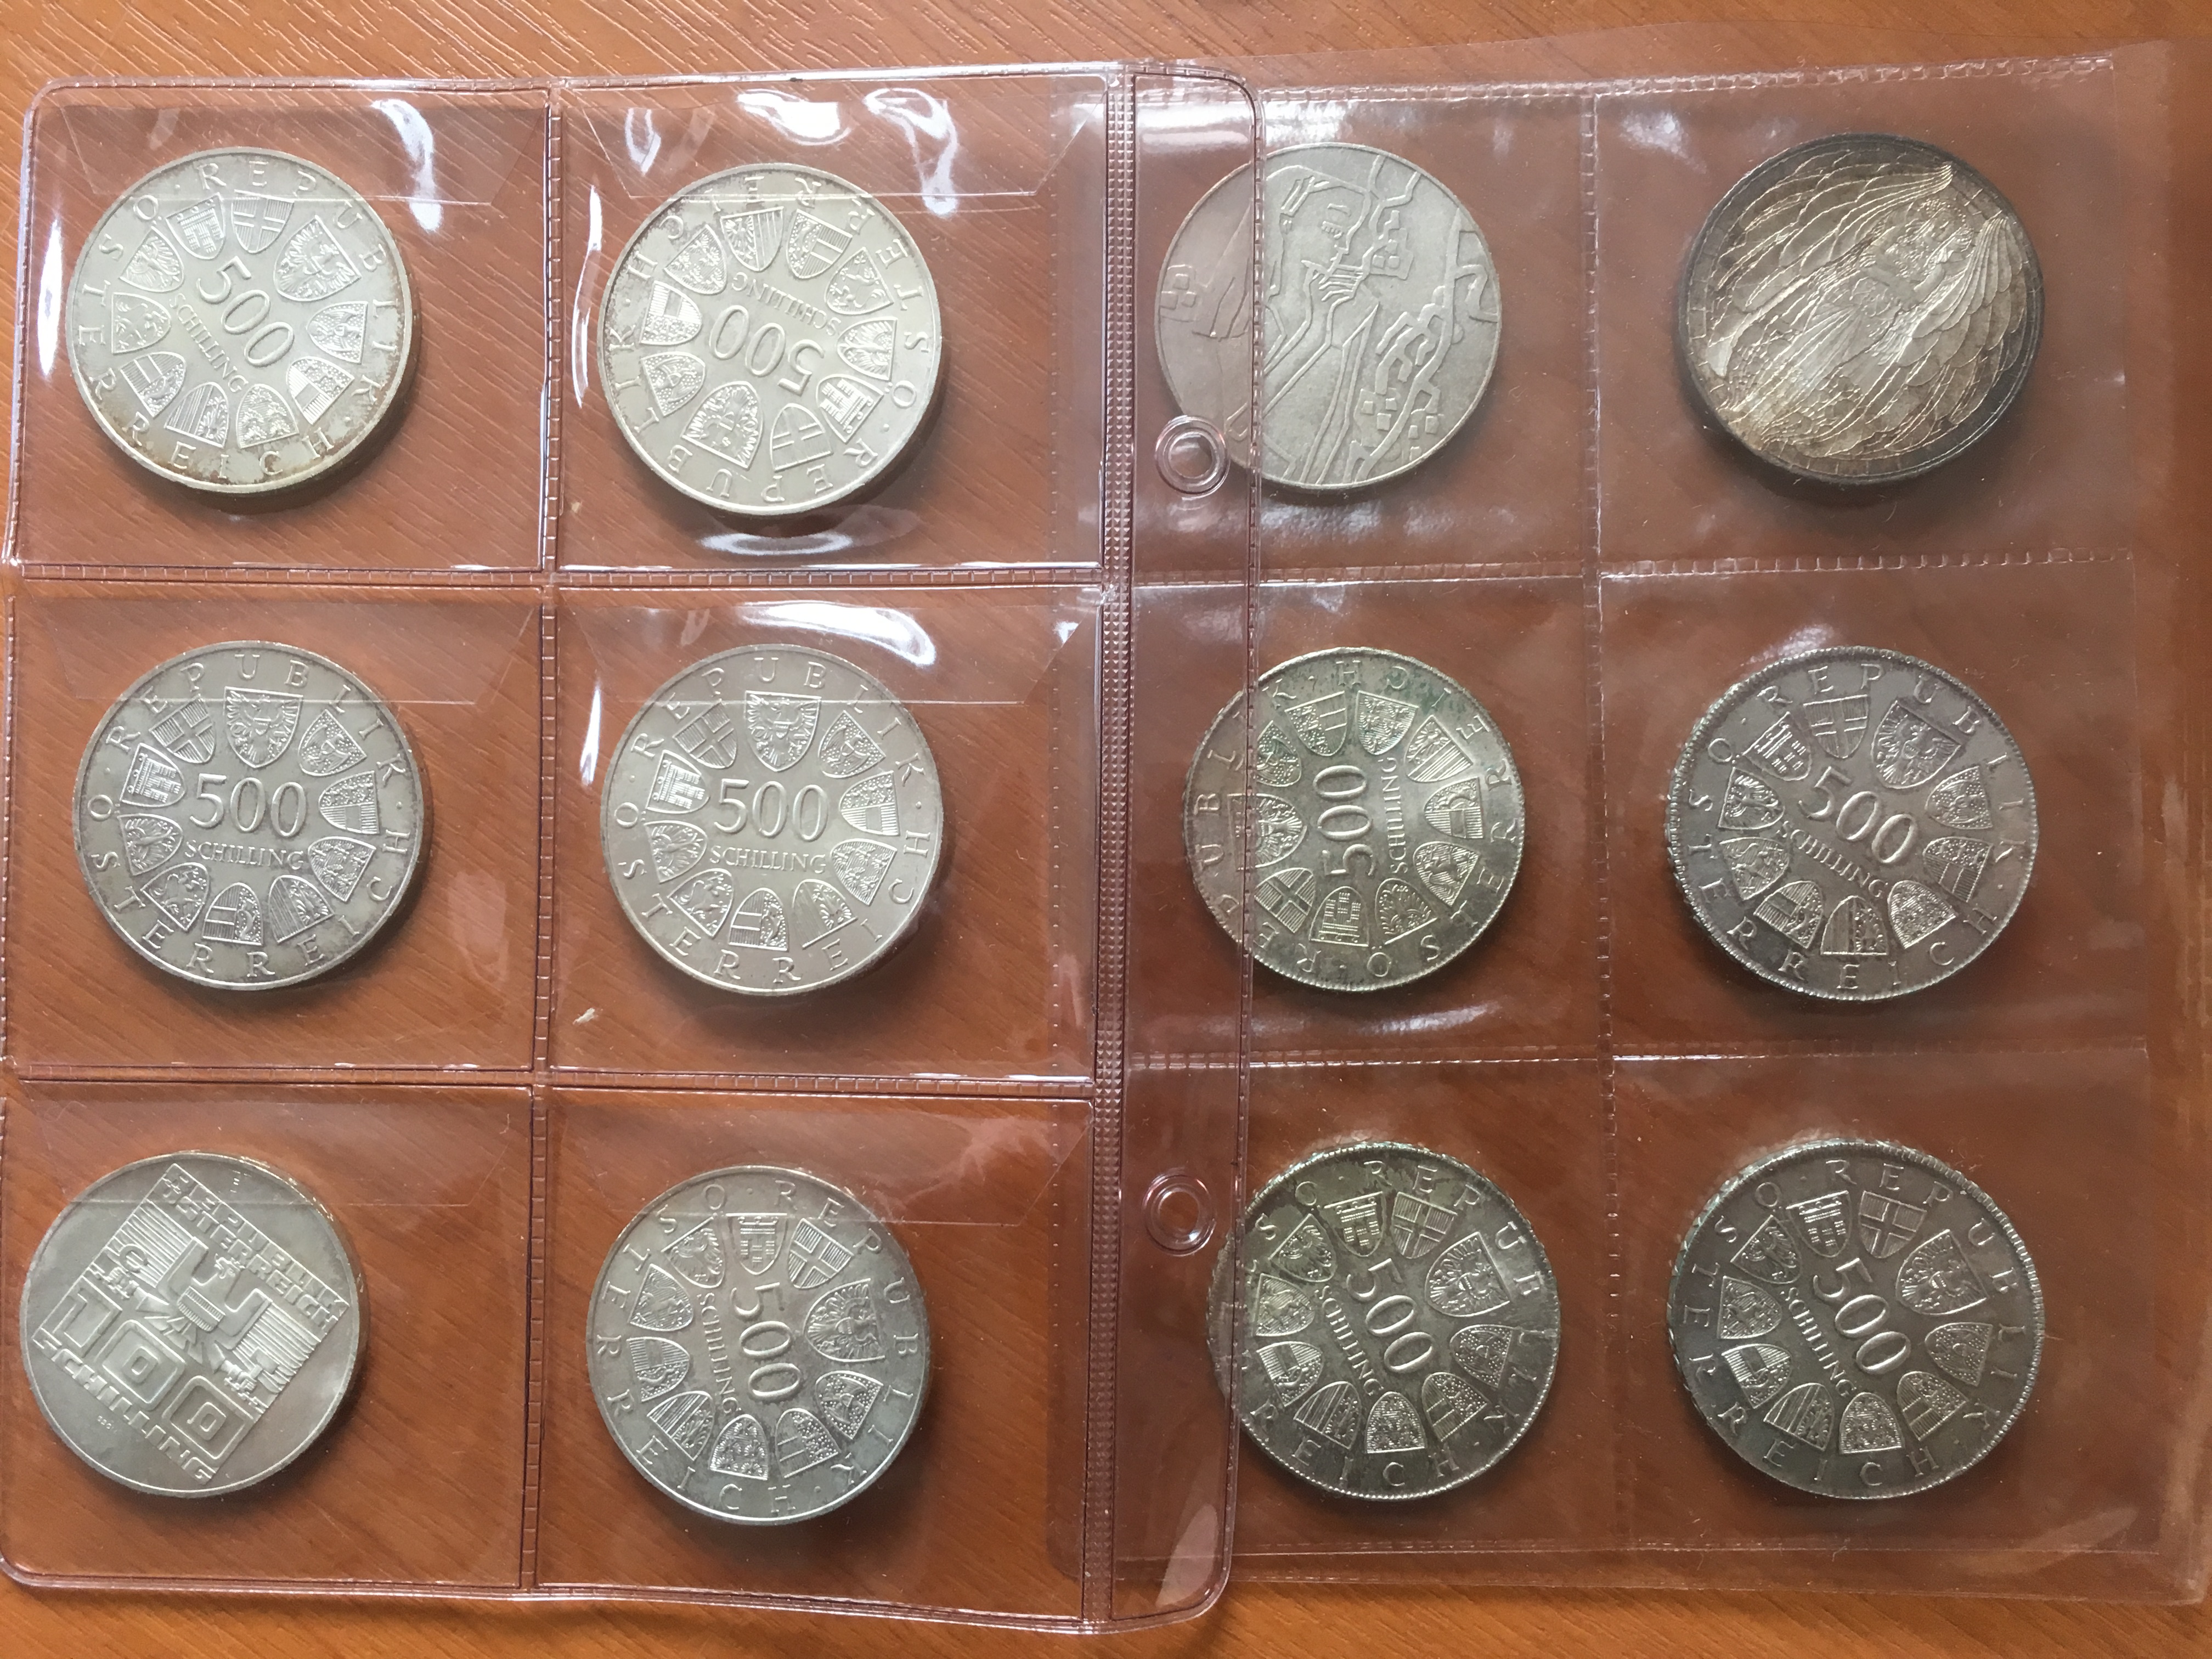 AUSTRIA: c1982-89 COLLECTION OF 500 SCHILLING SILVER COMMEMORATIVE COINS, - Image 6 of 6